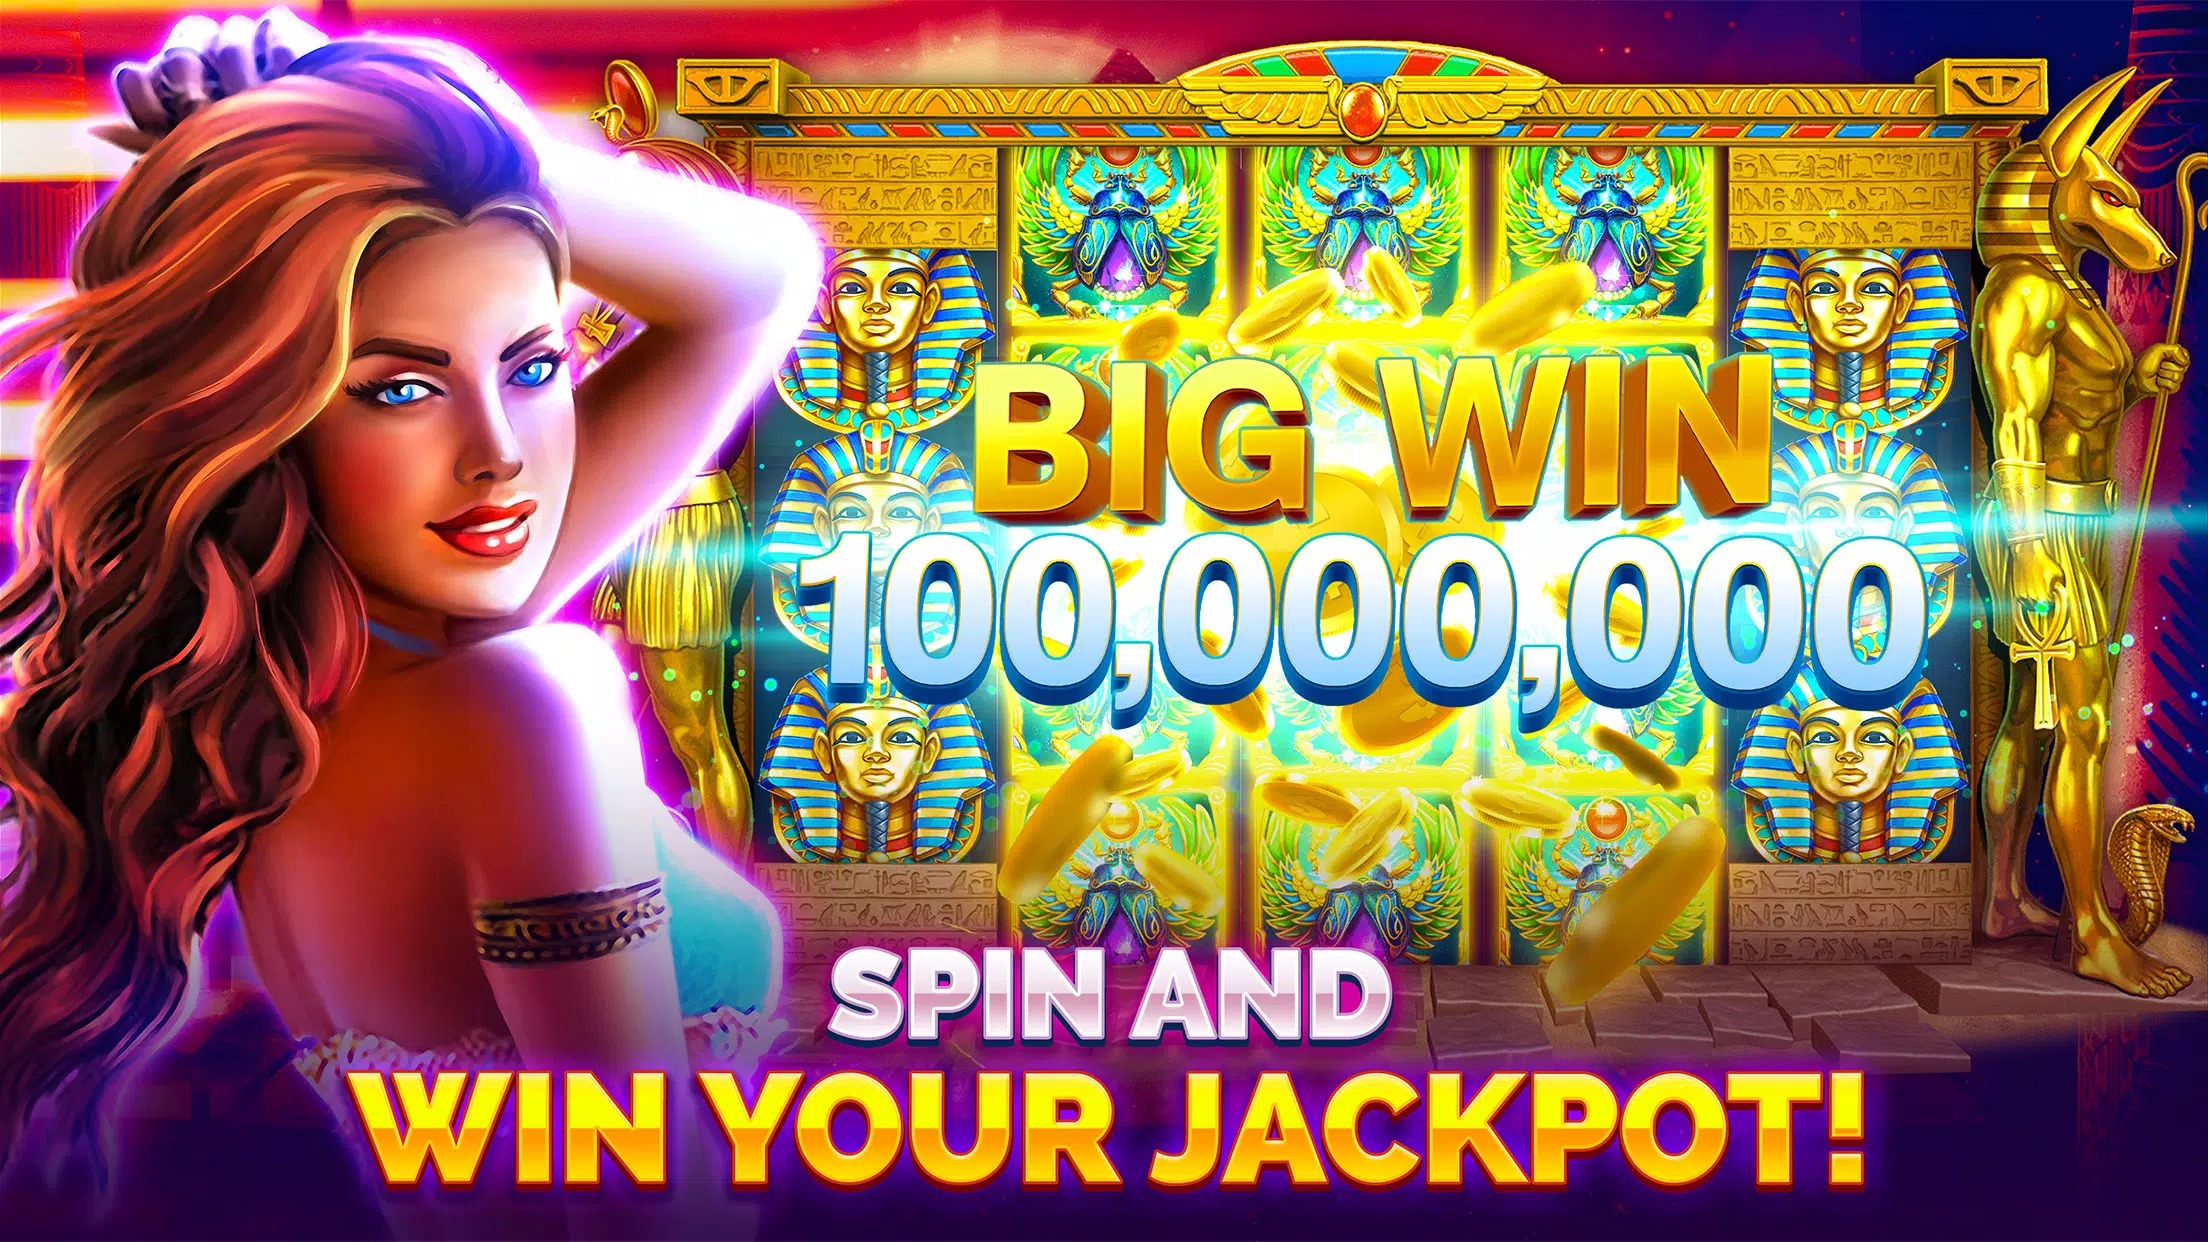 Best Practices for Playing Online Slots and Winning Big